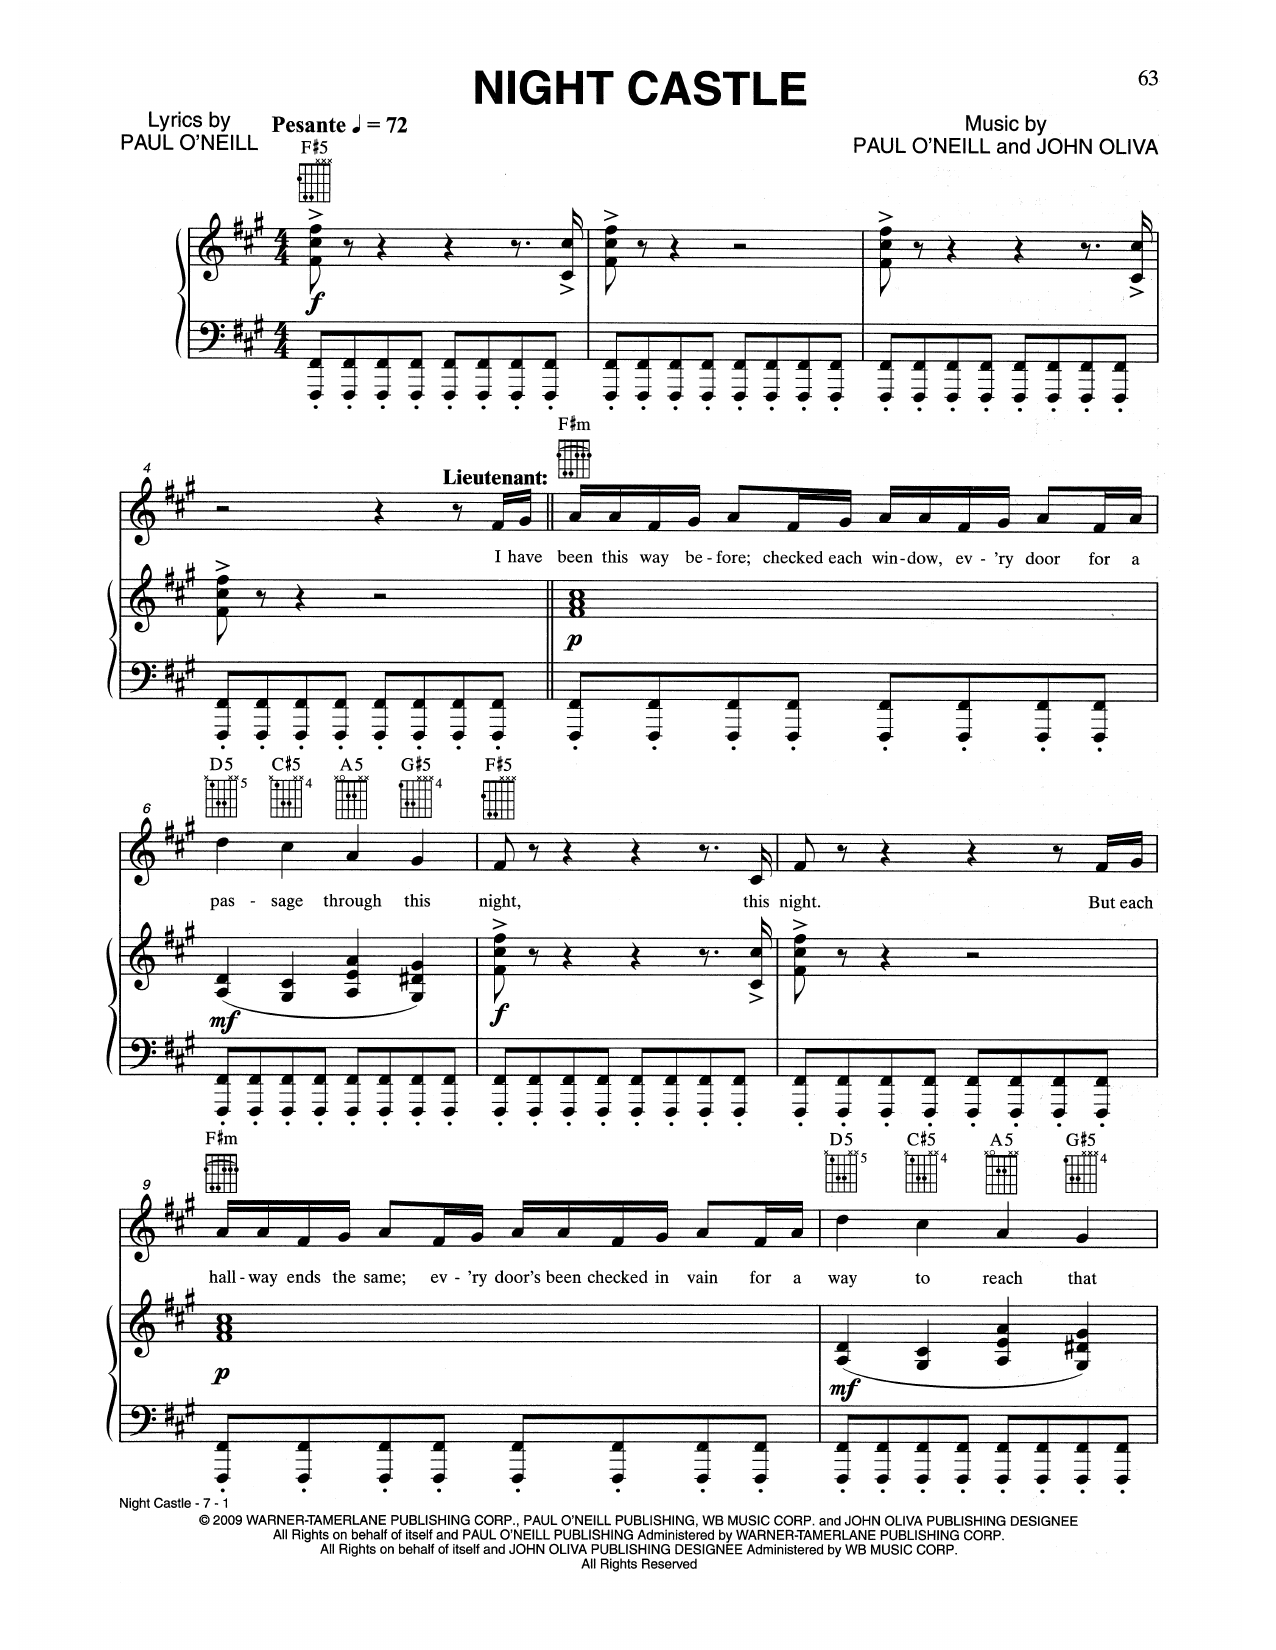 Download Trans-Siberian Orchestra Night Castle Sheet Music